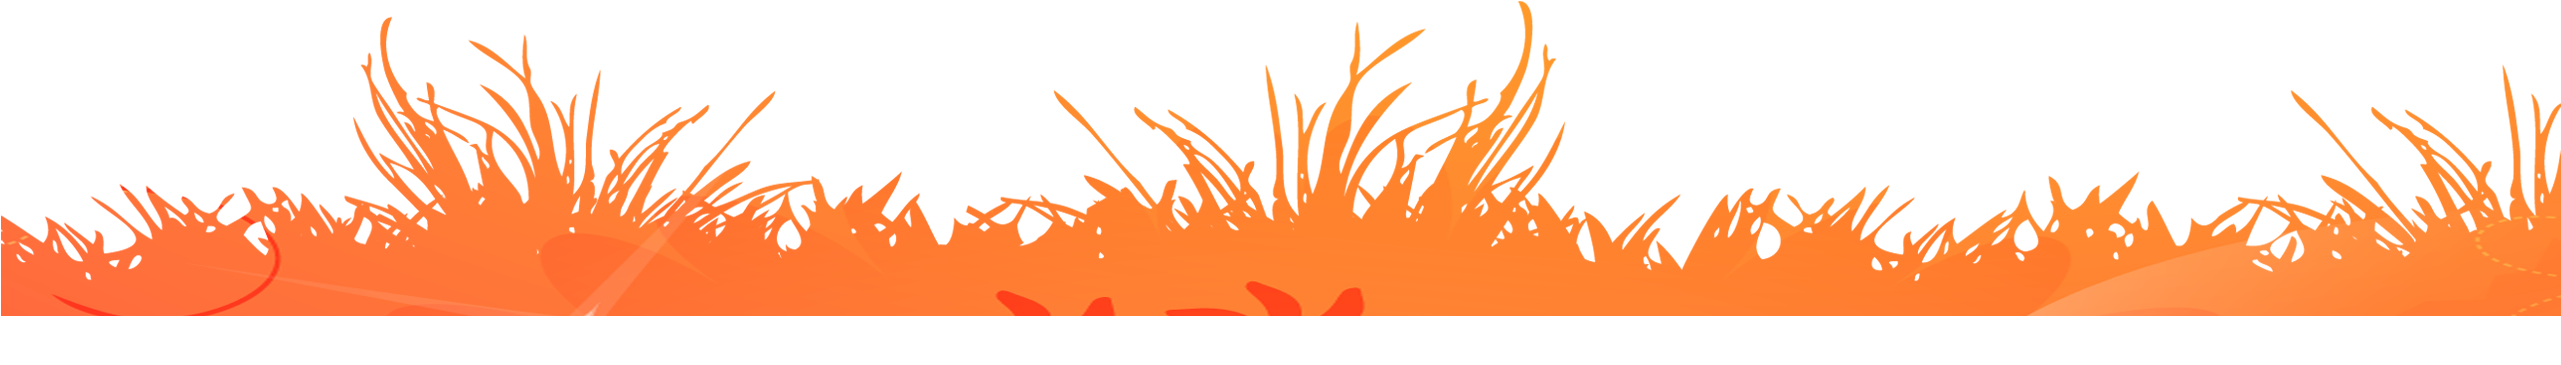 Abstract Sunrise Grass Silhouette PNG image